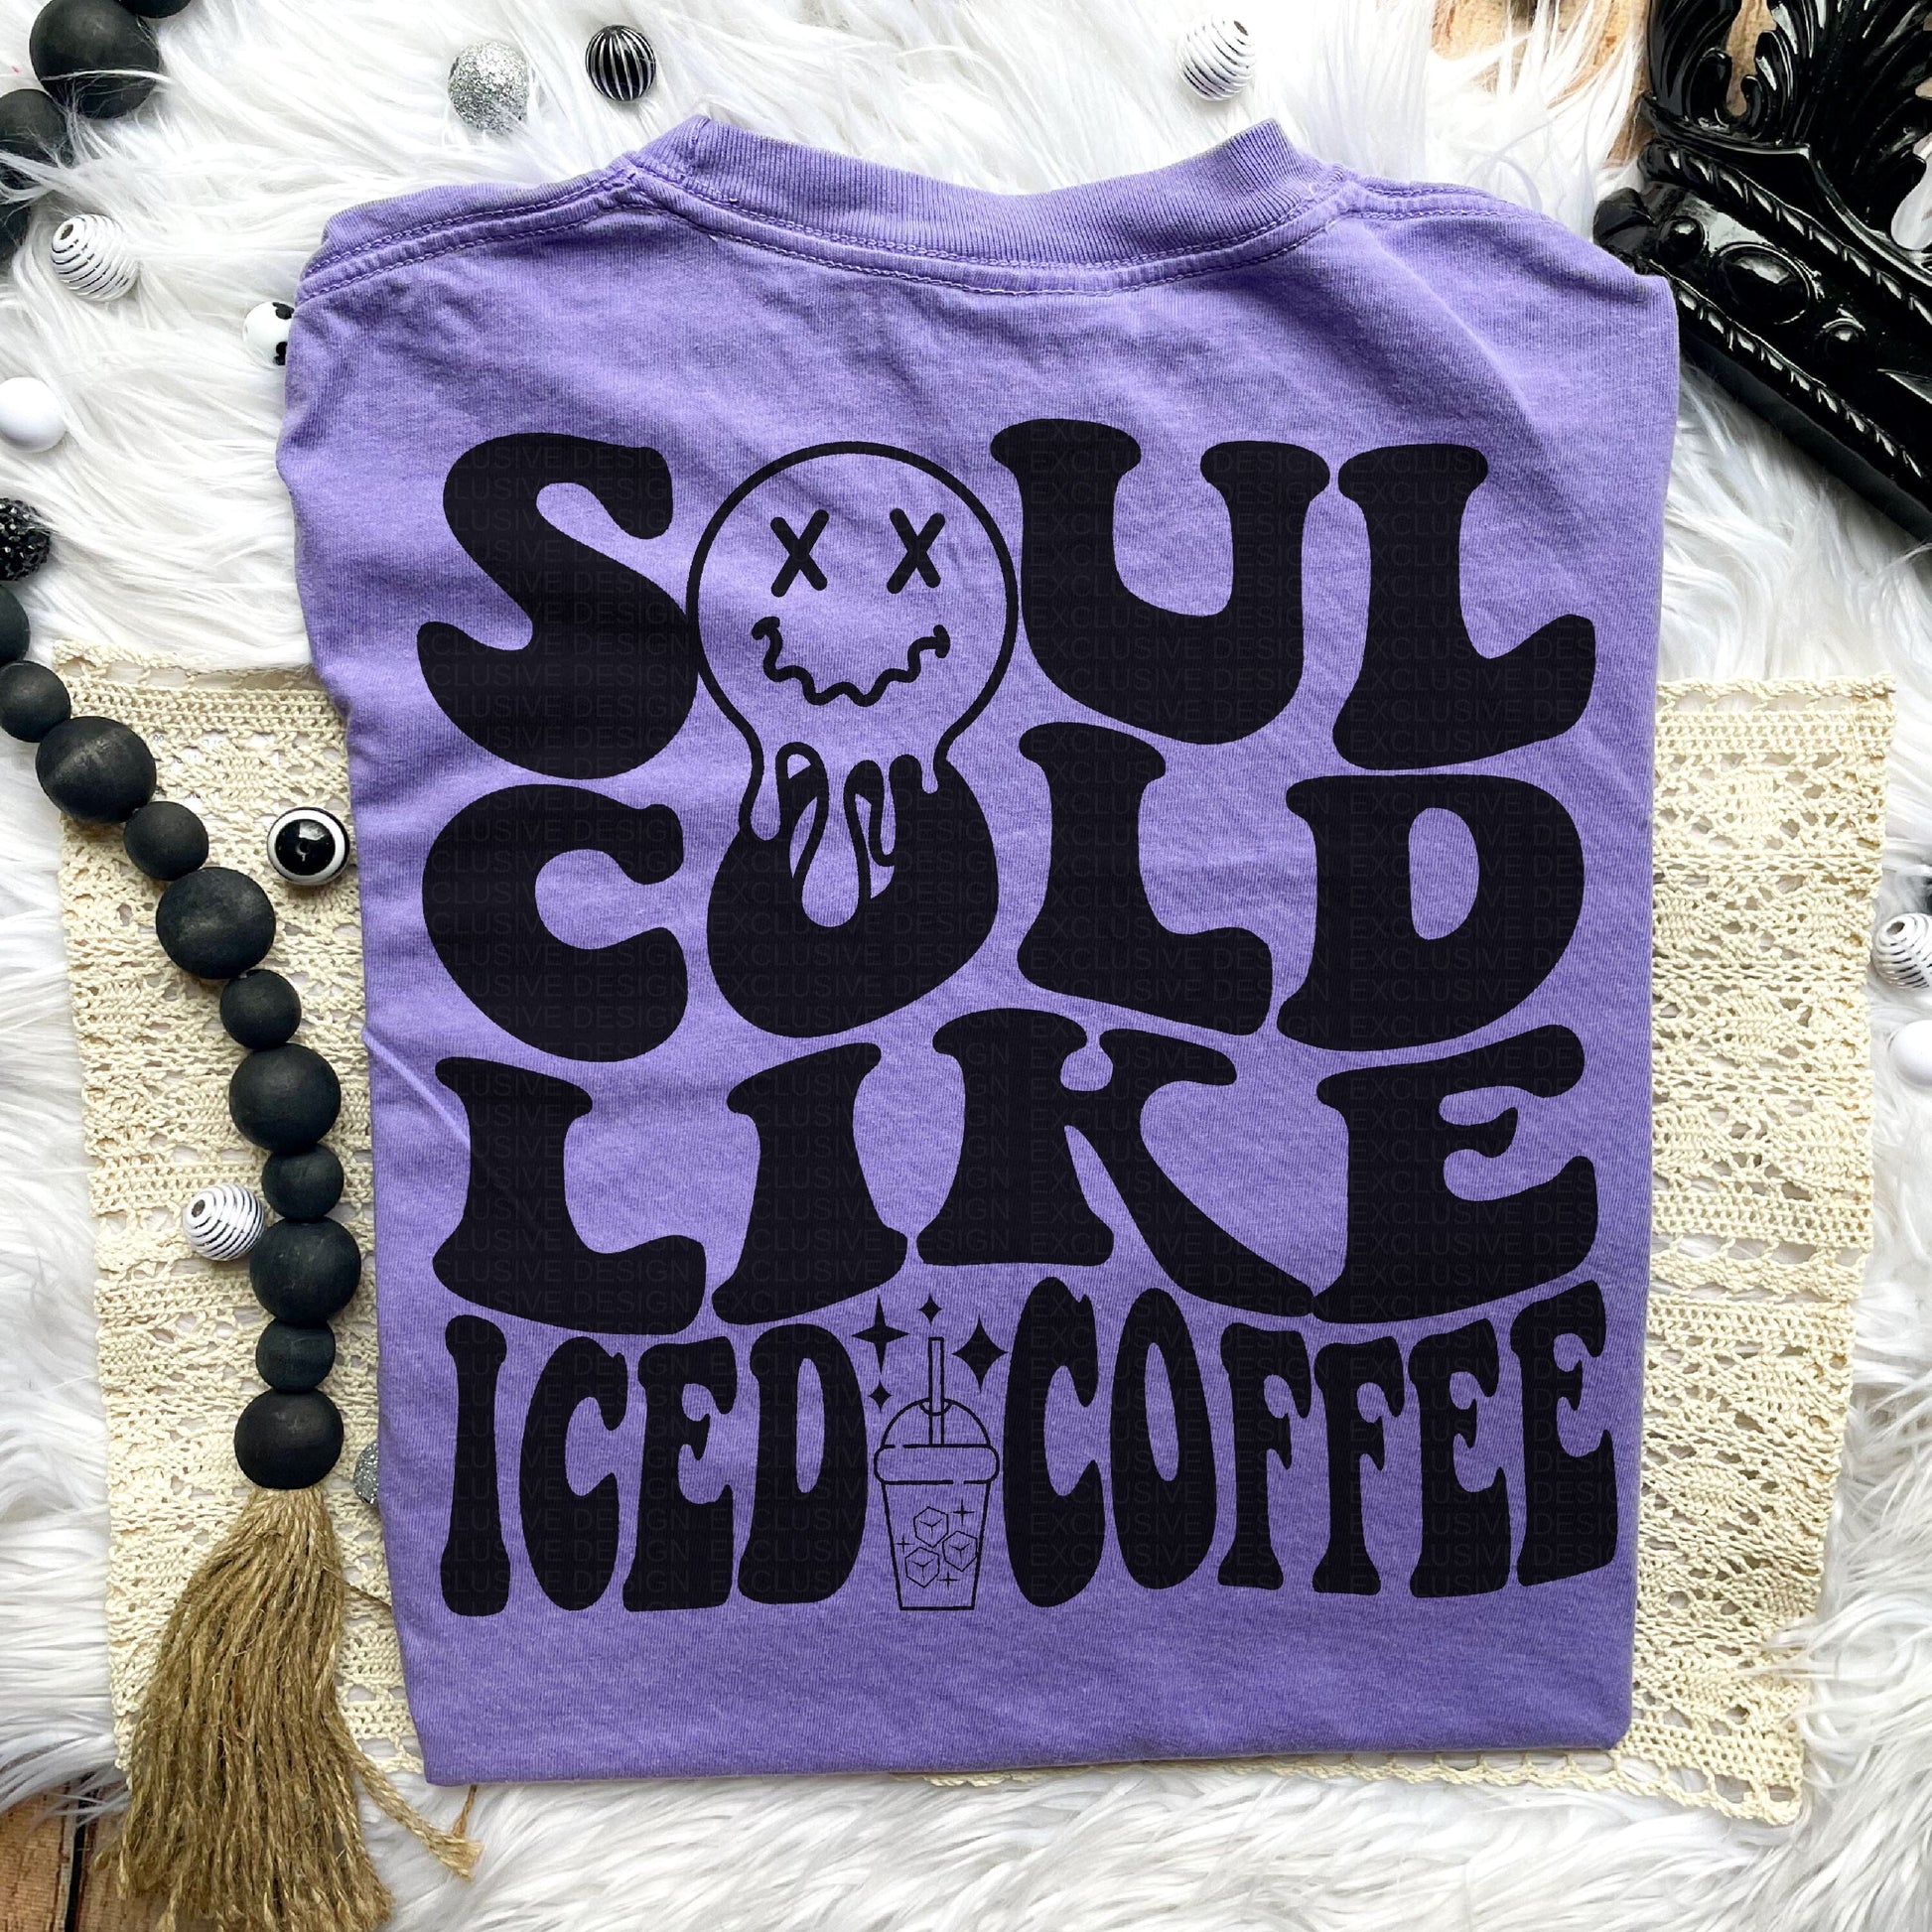 Soul Cold Iced Coffee T-Shirt graphic t-shirt Shop Resilience Boutique S PERFECT PURPLE 